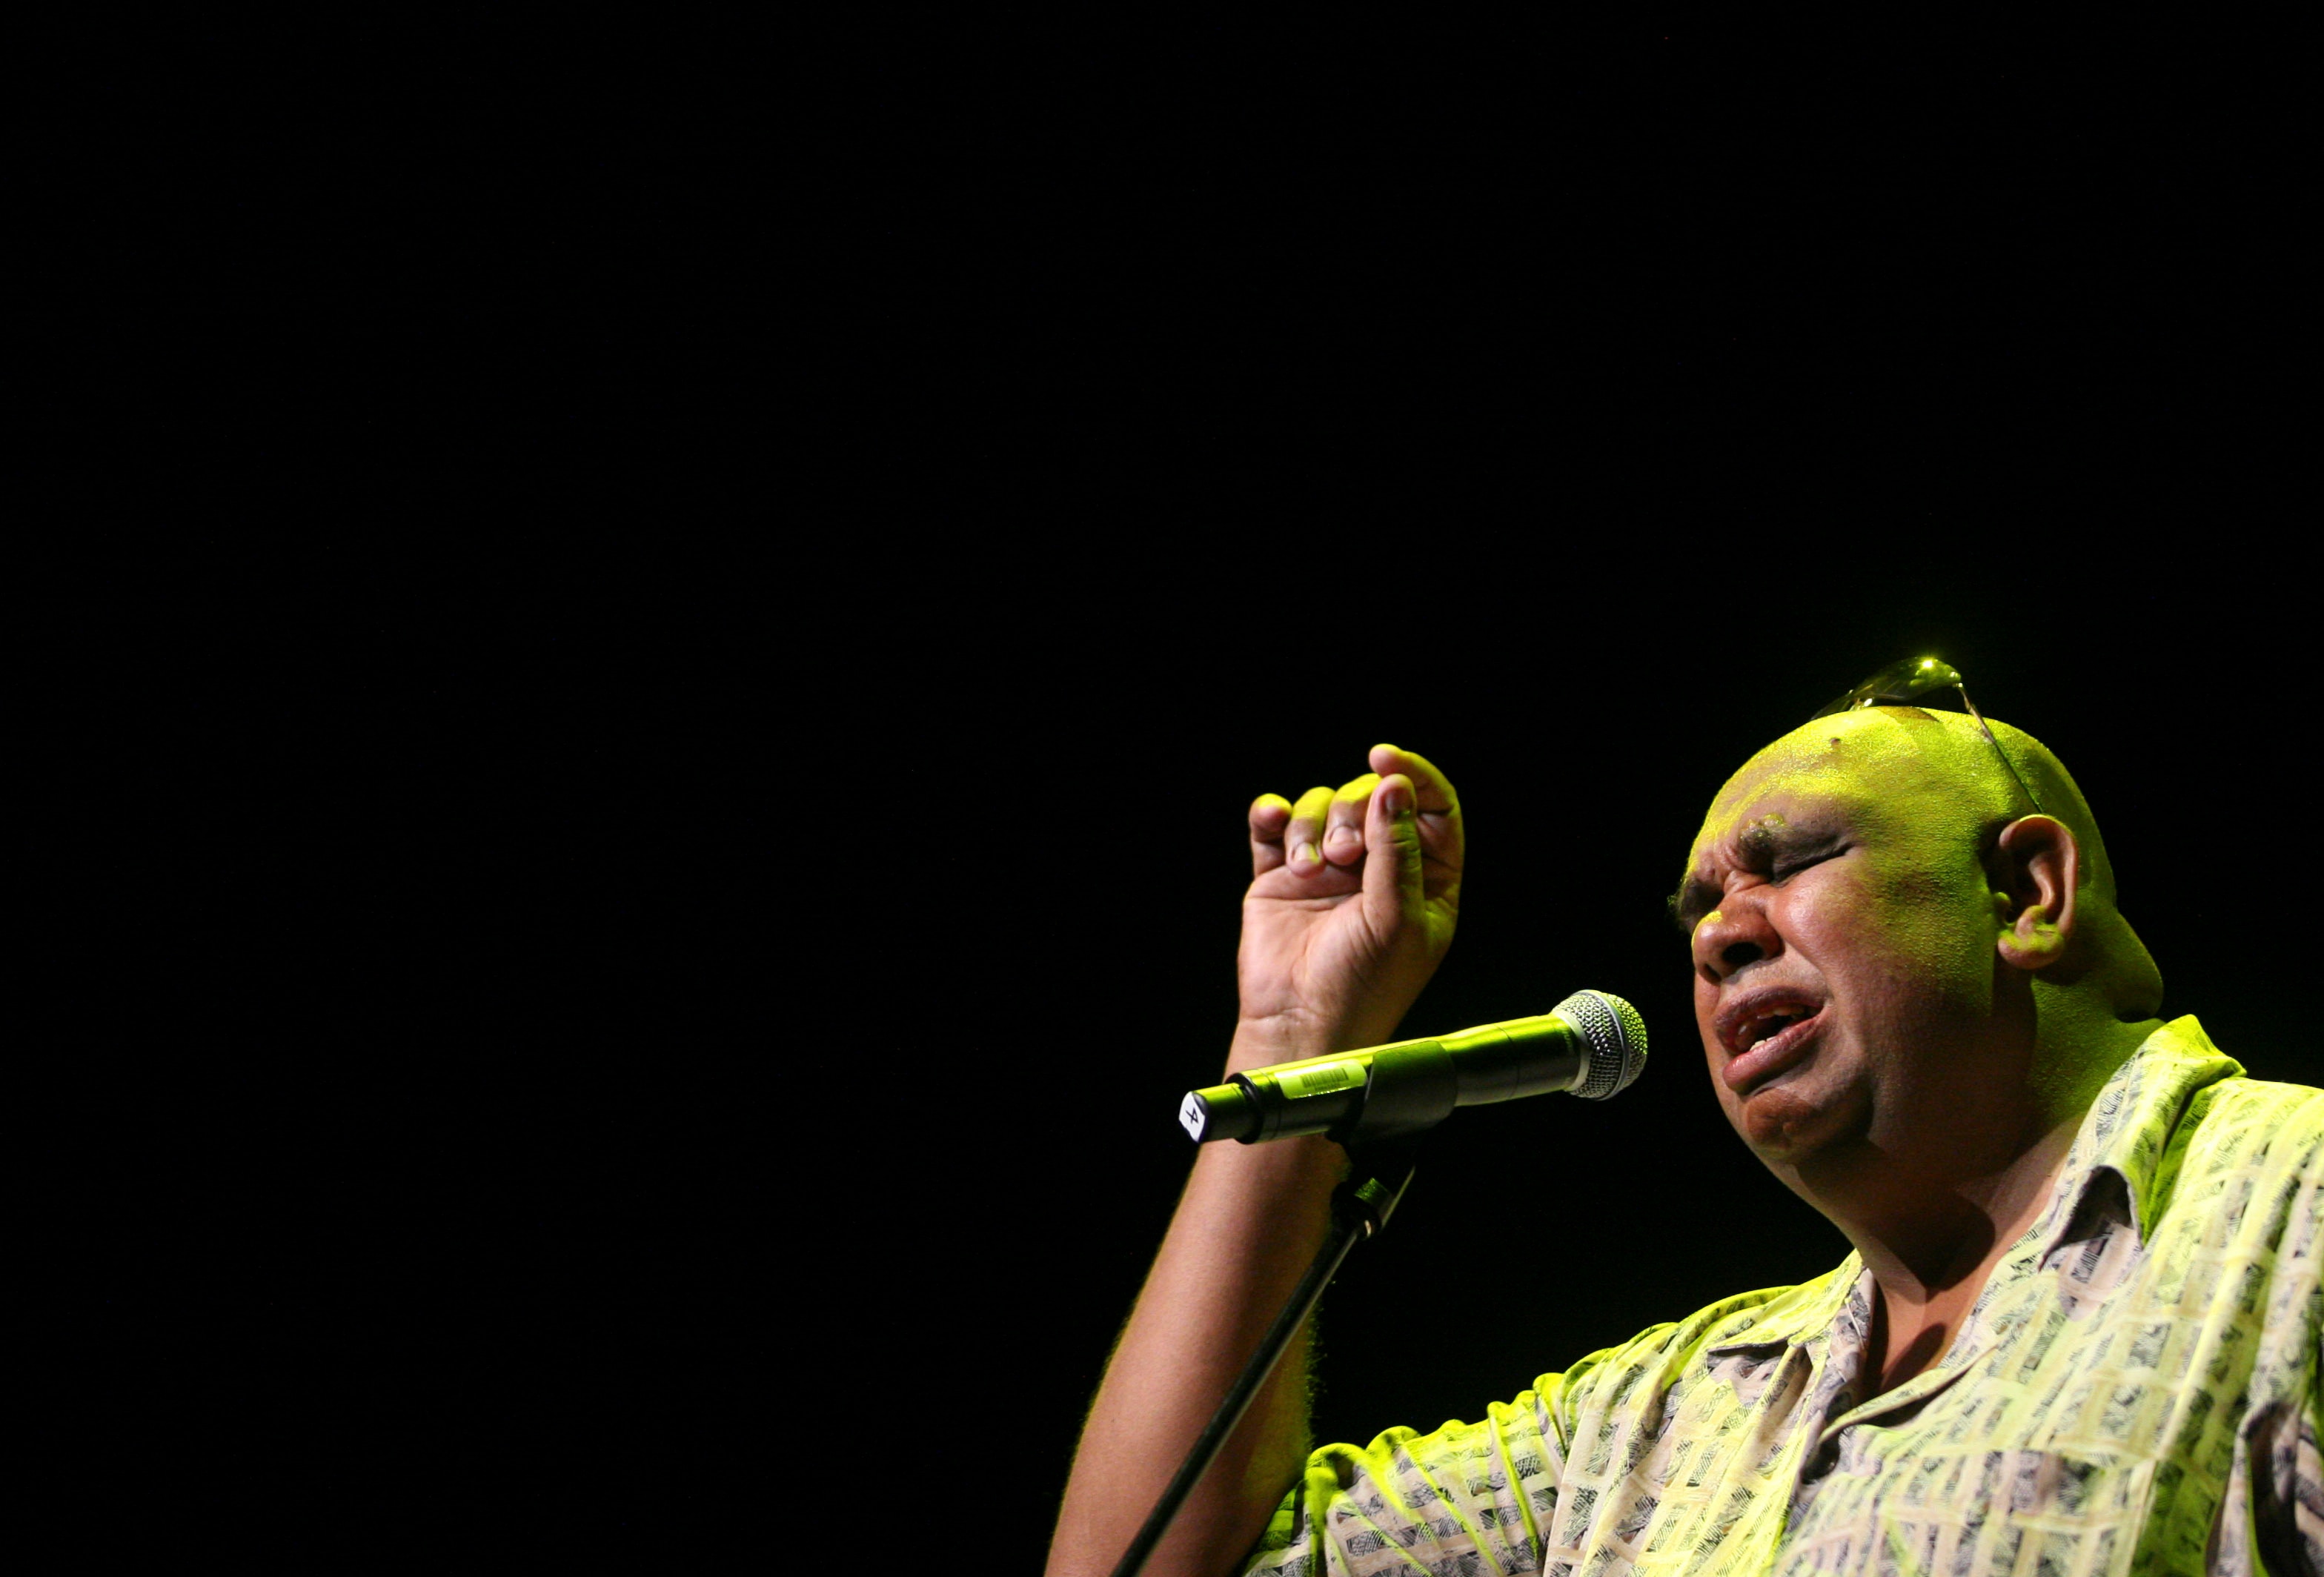 Singer Kutcha Edwards rehearses his segment of the Murundak concert at the Sydney Opera House in Sydney, Australia, Tuesday, Jan. 22, 2008. Murundak - which means "alive" in the Australian aboriginal Woiwurrung language - features songs that express joy, 